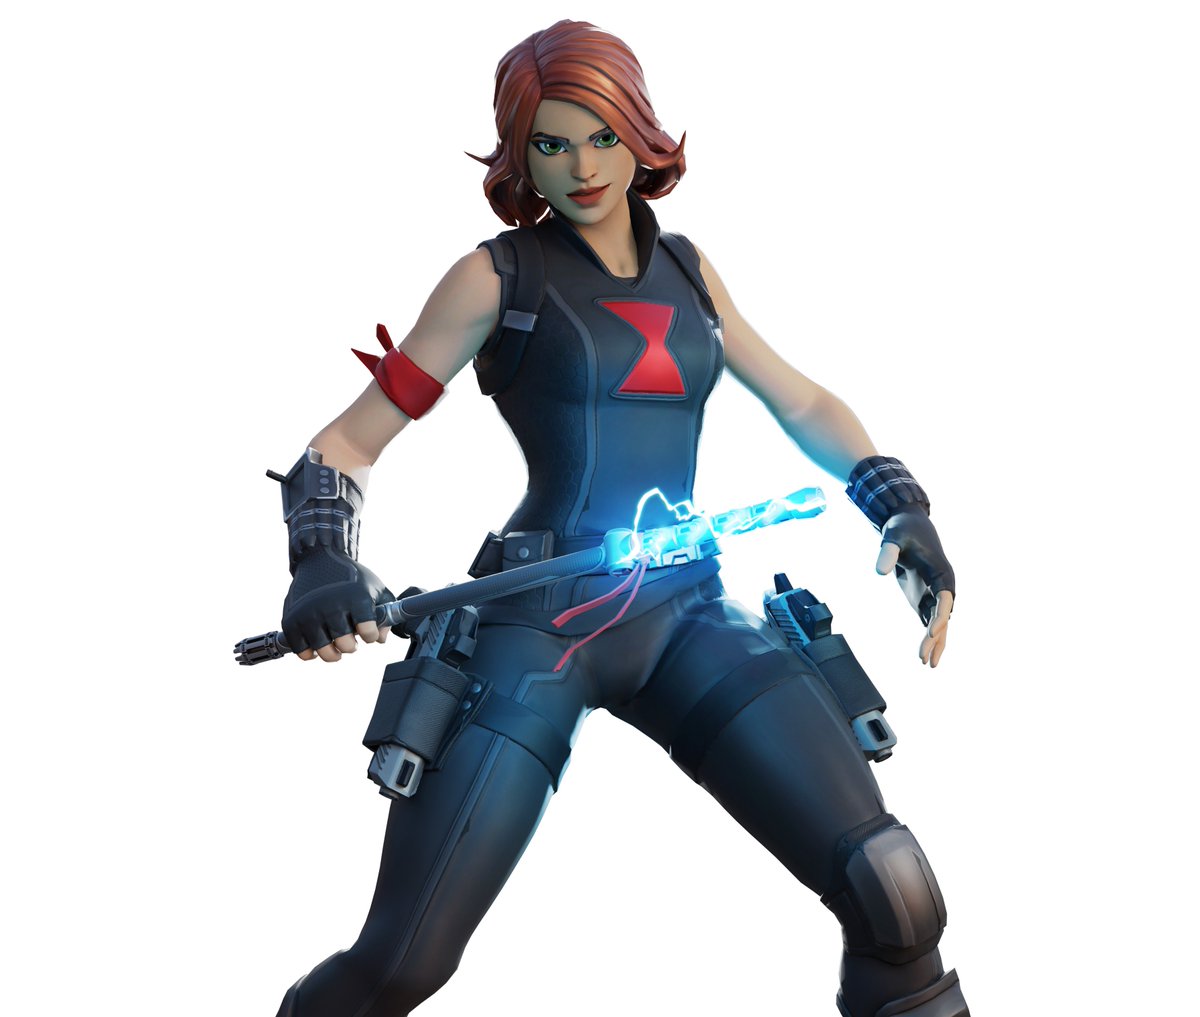 Blackwidow Render Free to use Download: https://drive.google.com/file/d/1KQ...